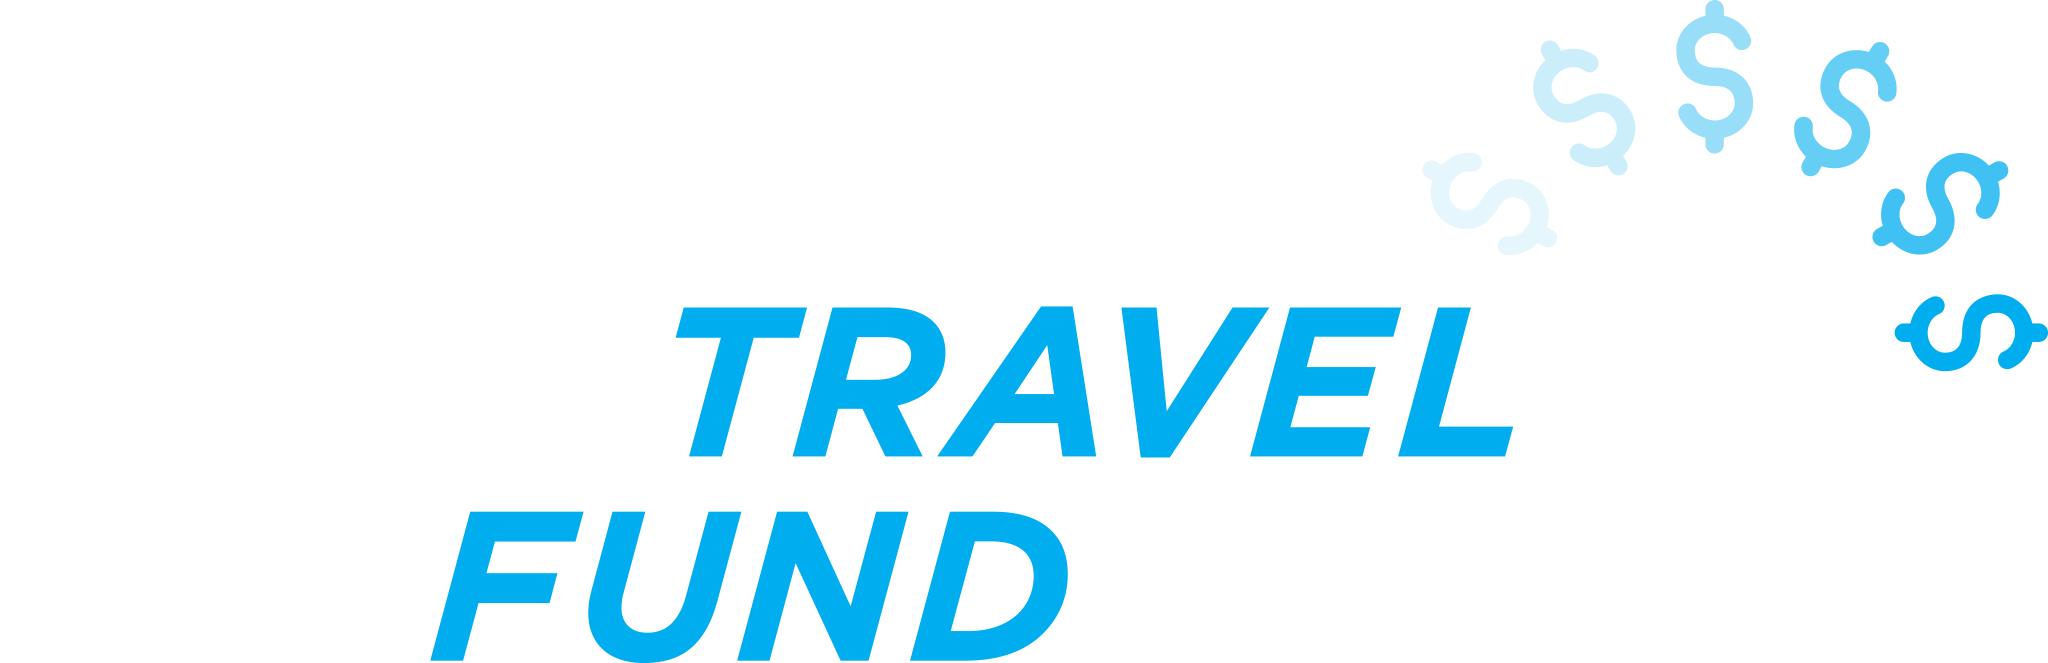 Travel Fund Challenge Coupons & Promo codes